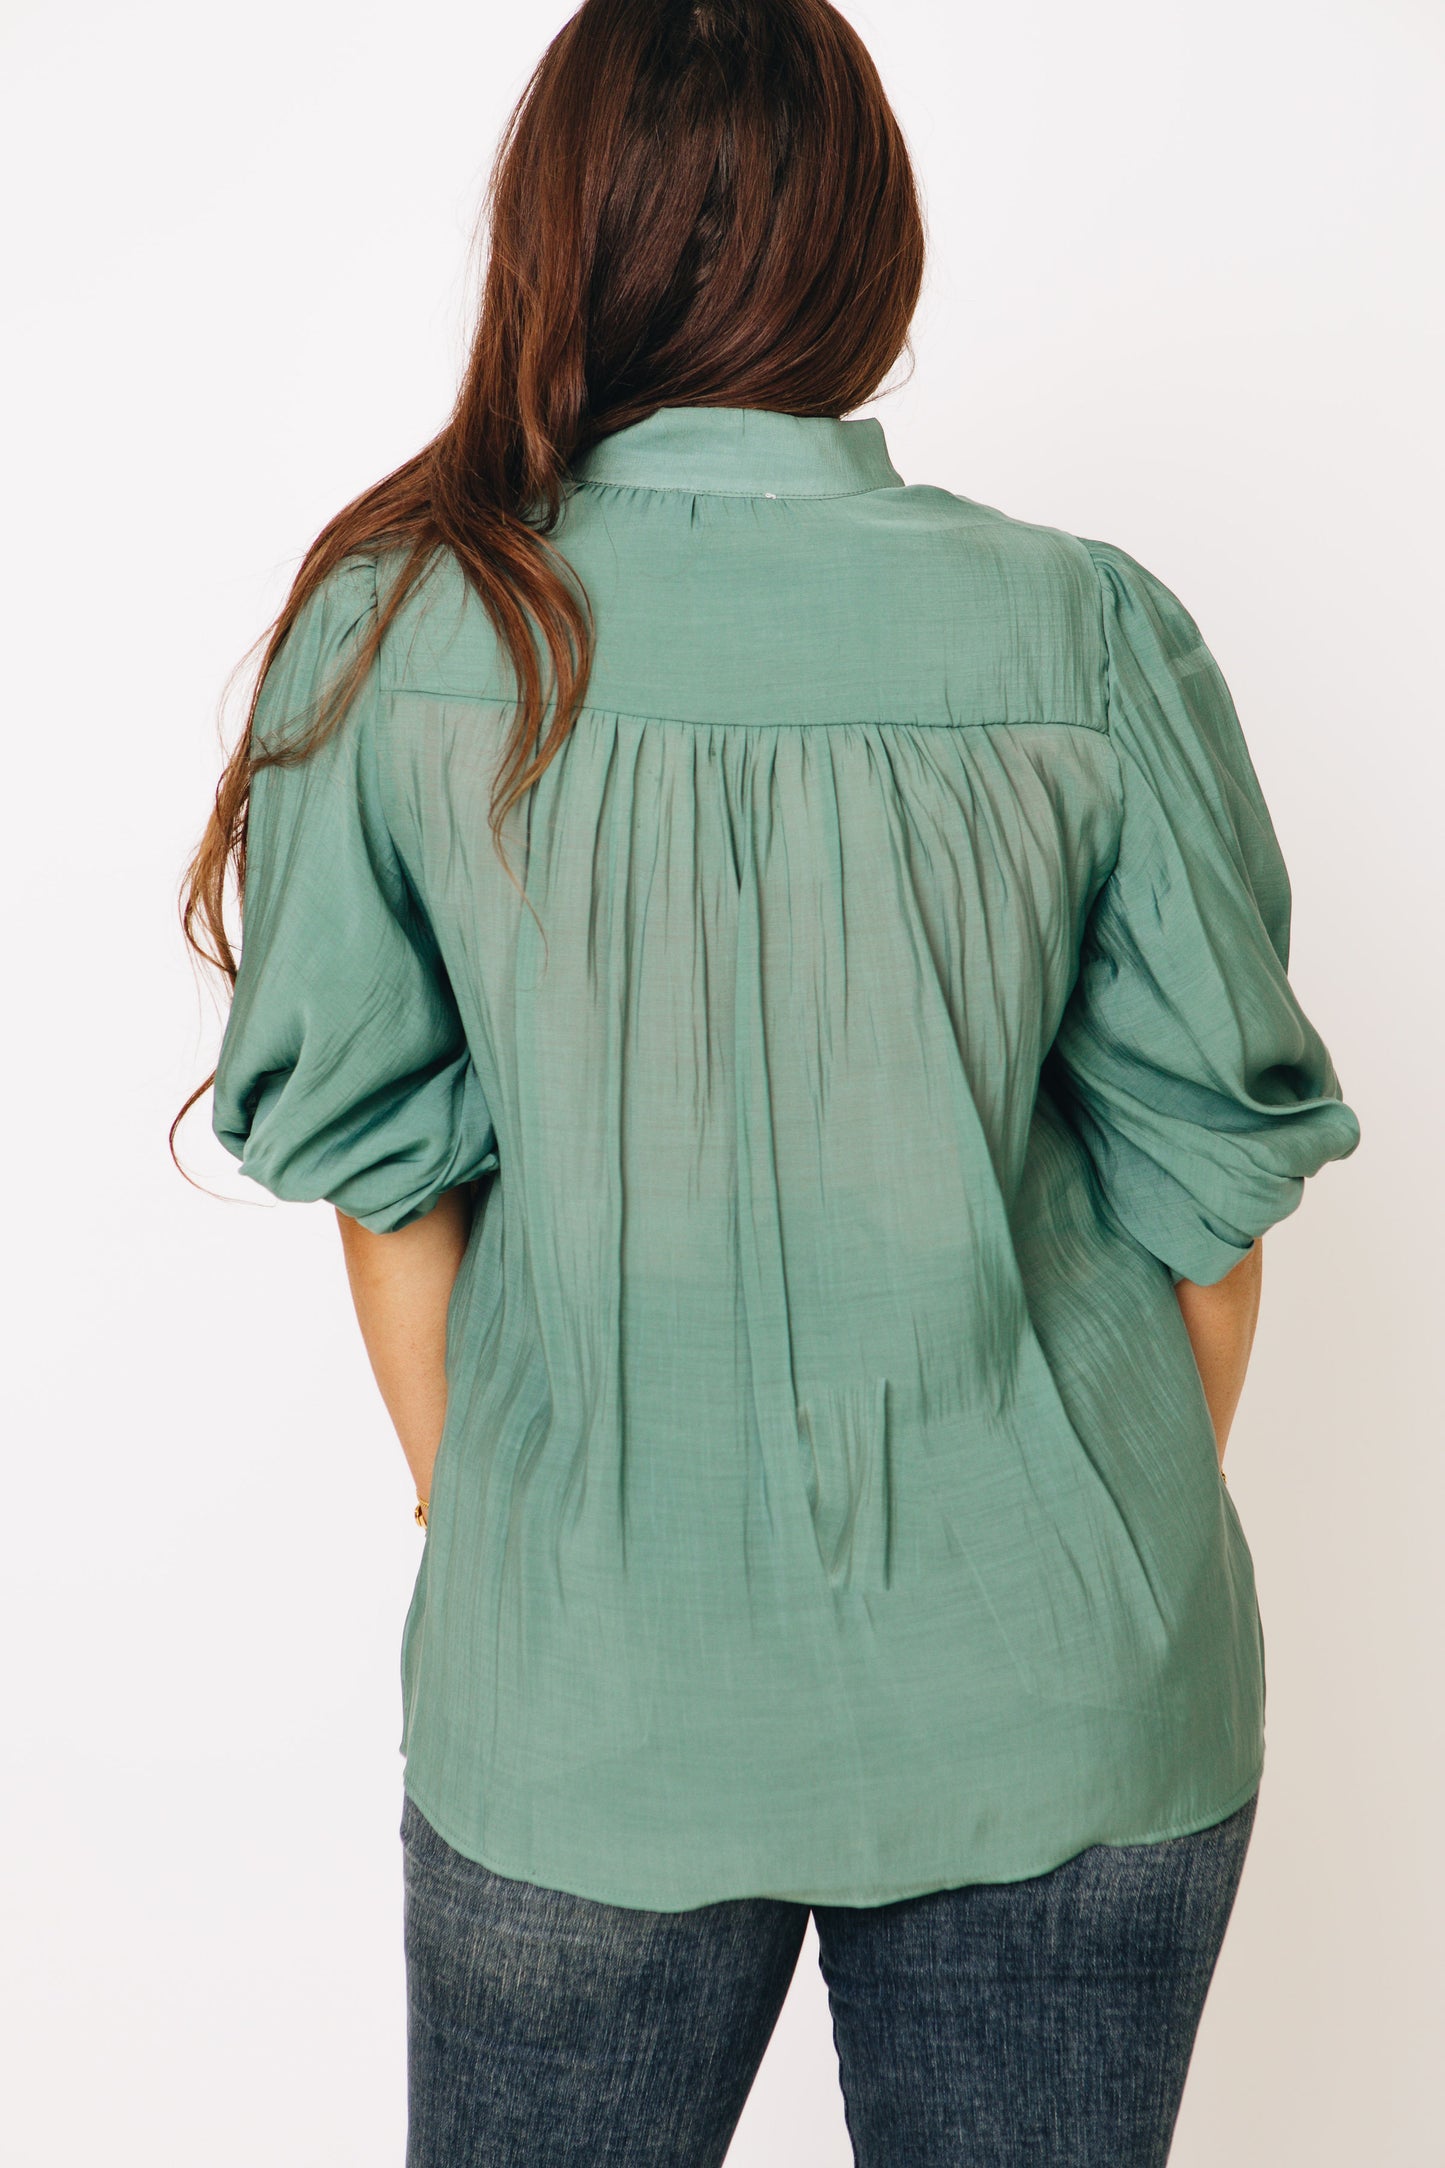 Solid Color Jewel Button Short Balloon Sleeve Blouse (S-3XL)